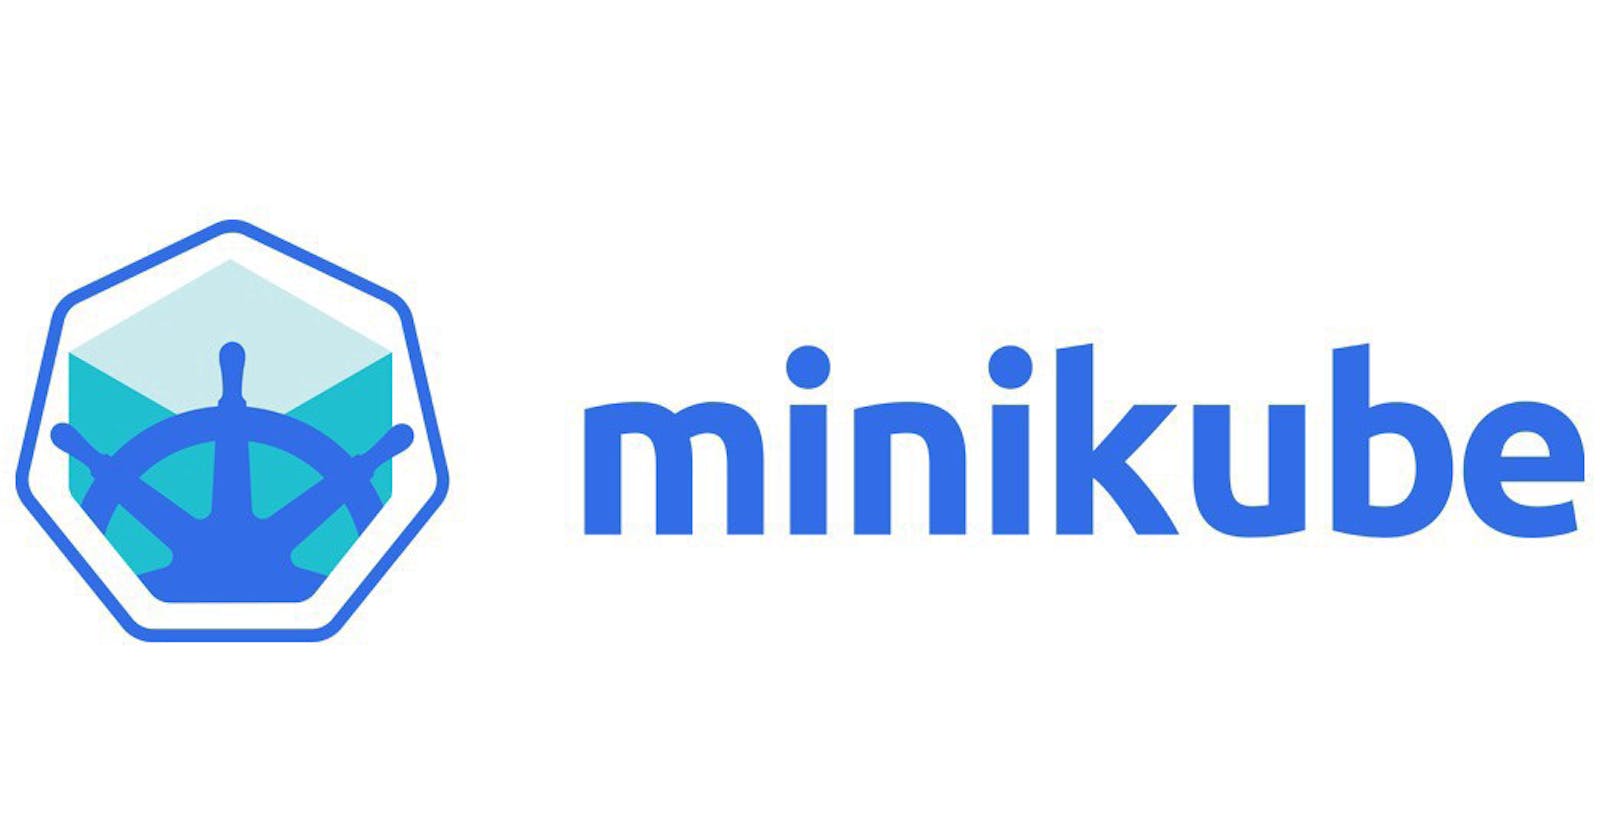 The Path to AKS - Getting started with minikube